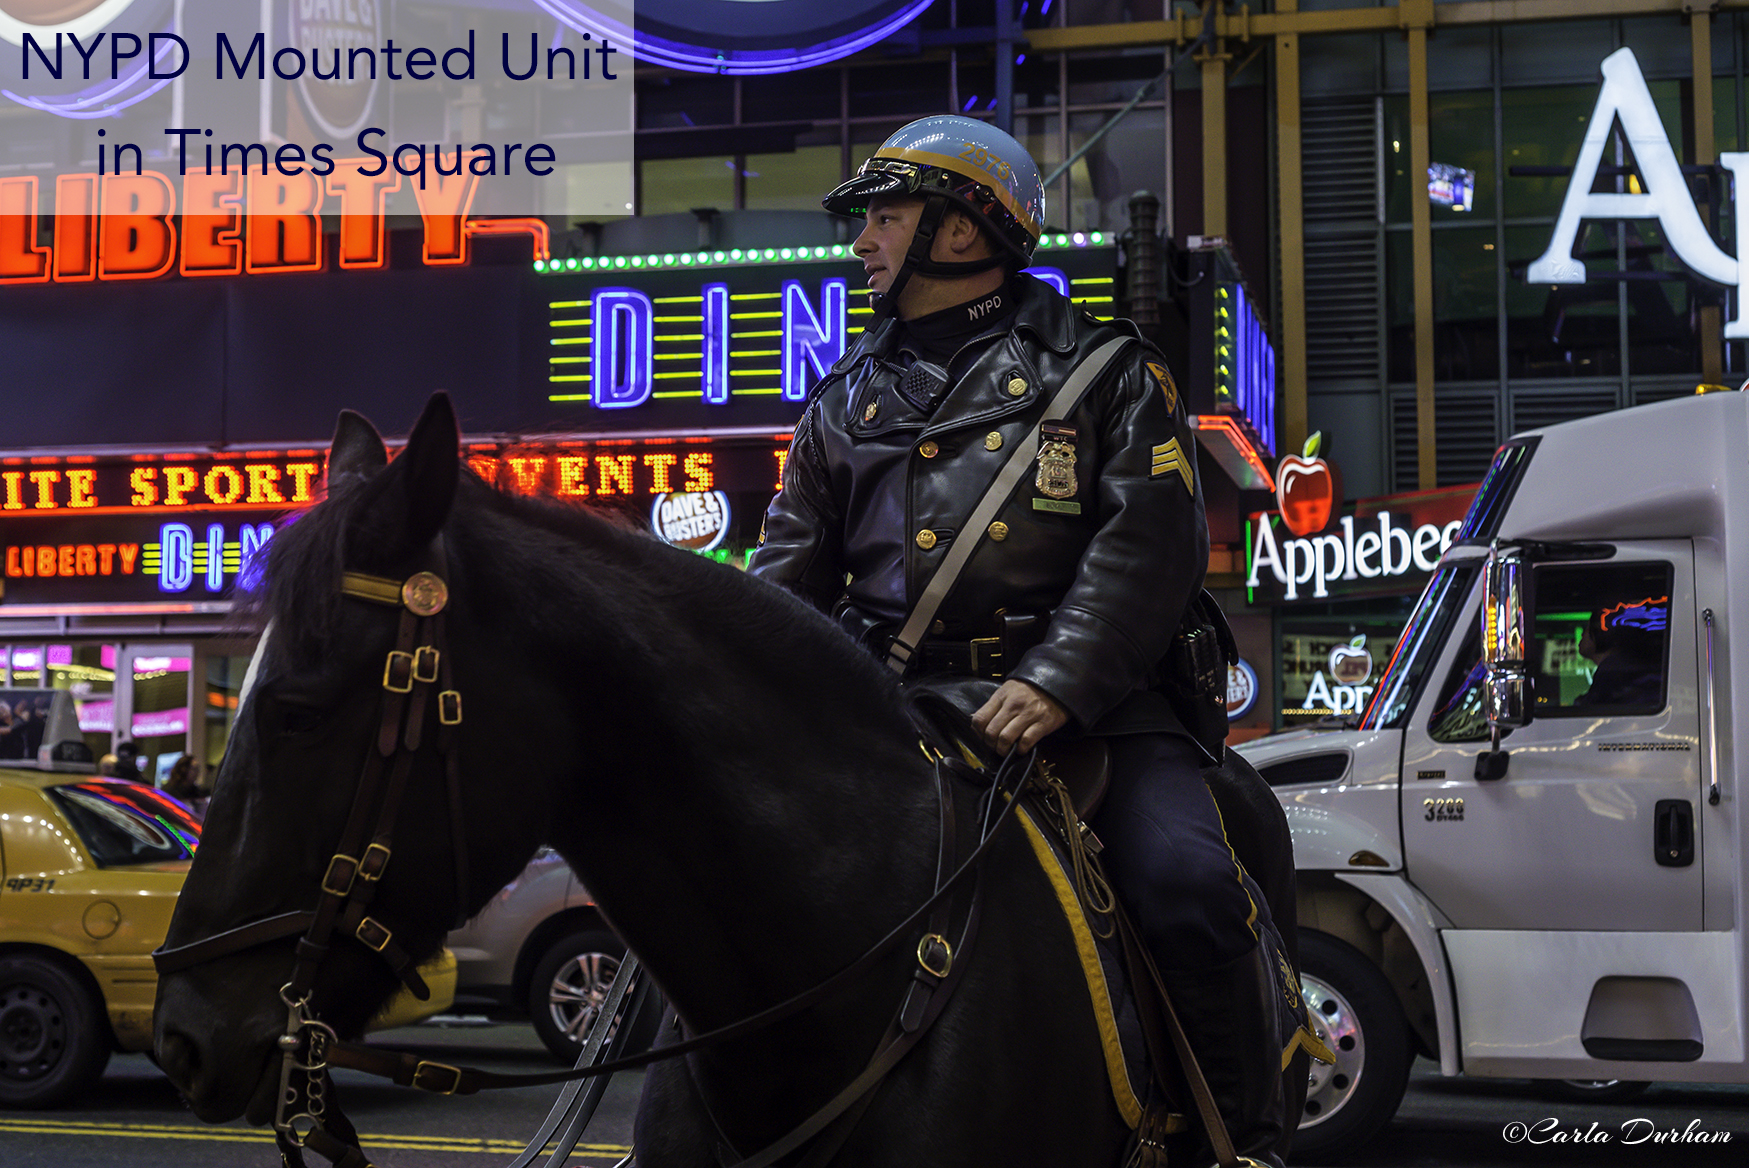 New York Police Department Mounted Unit in Times Square